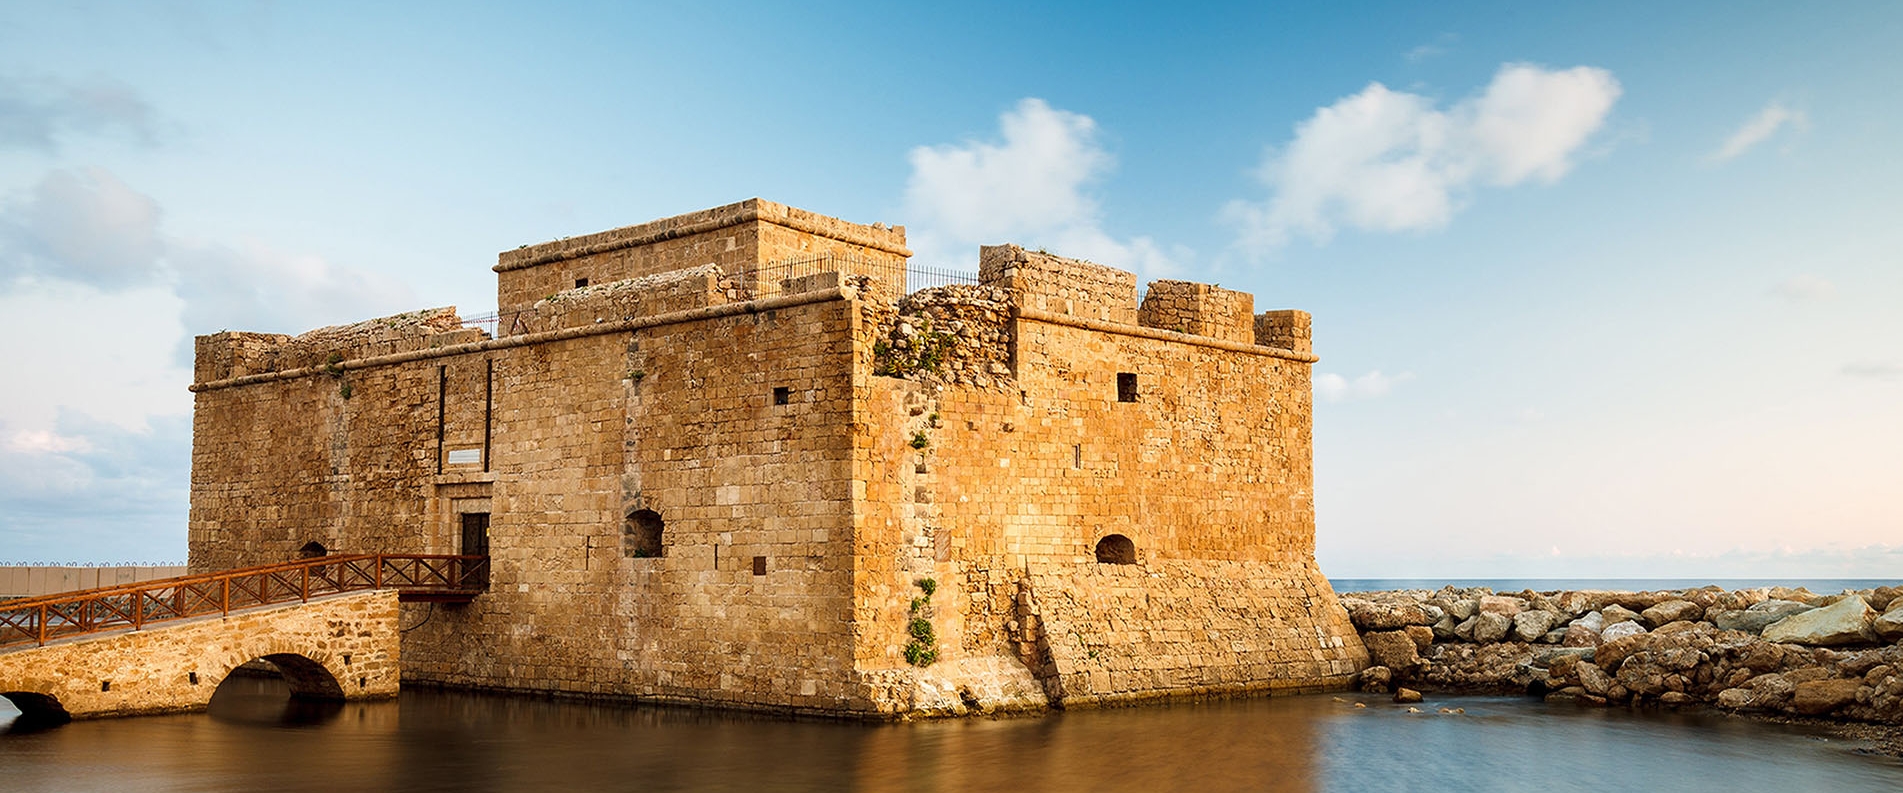 Cyprus castles and fortresses